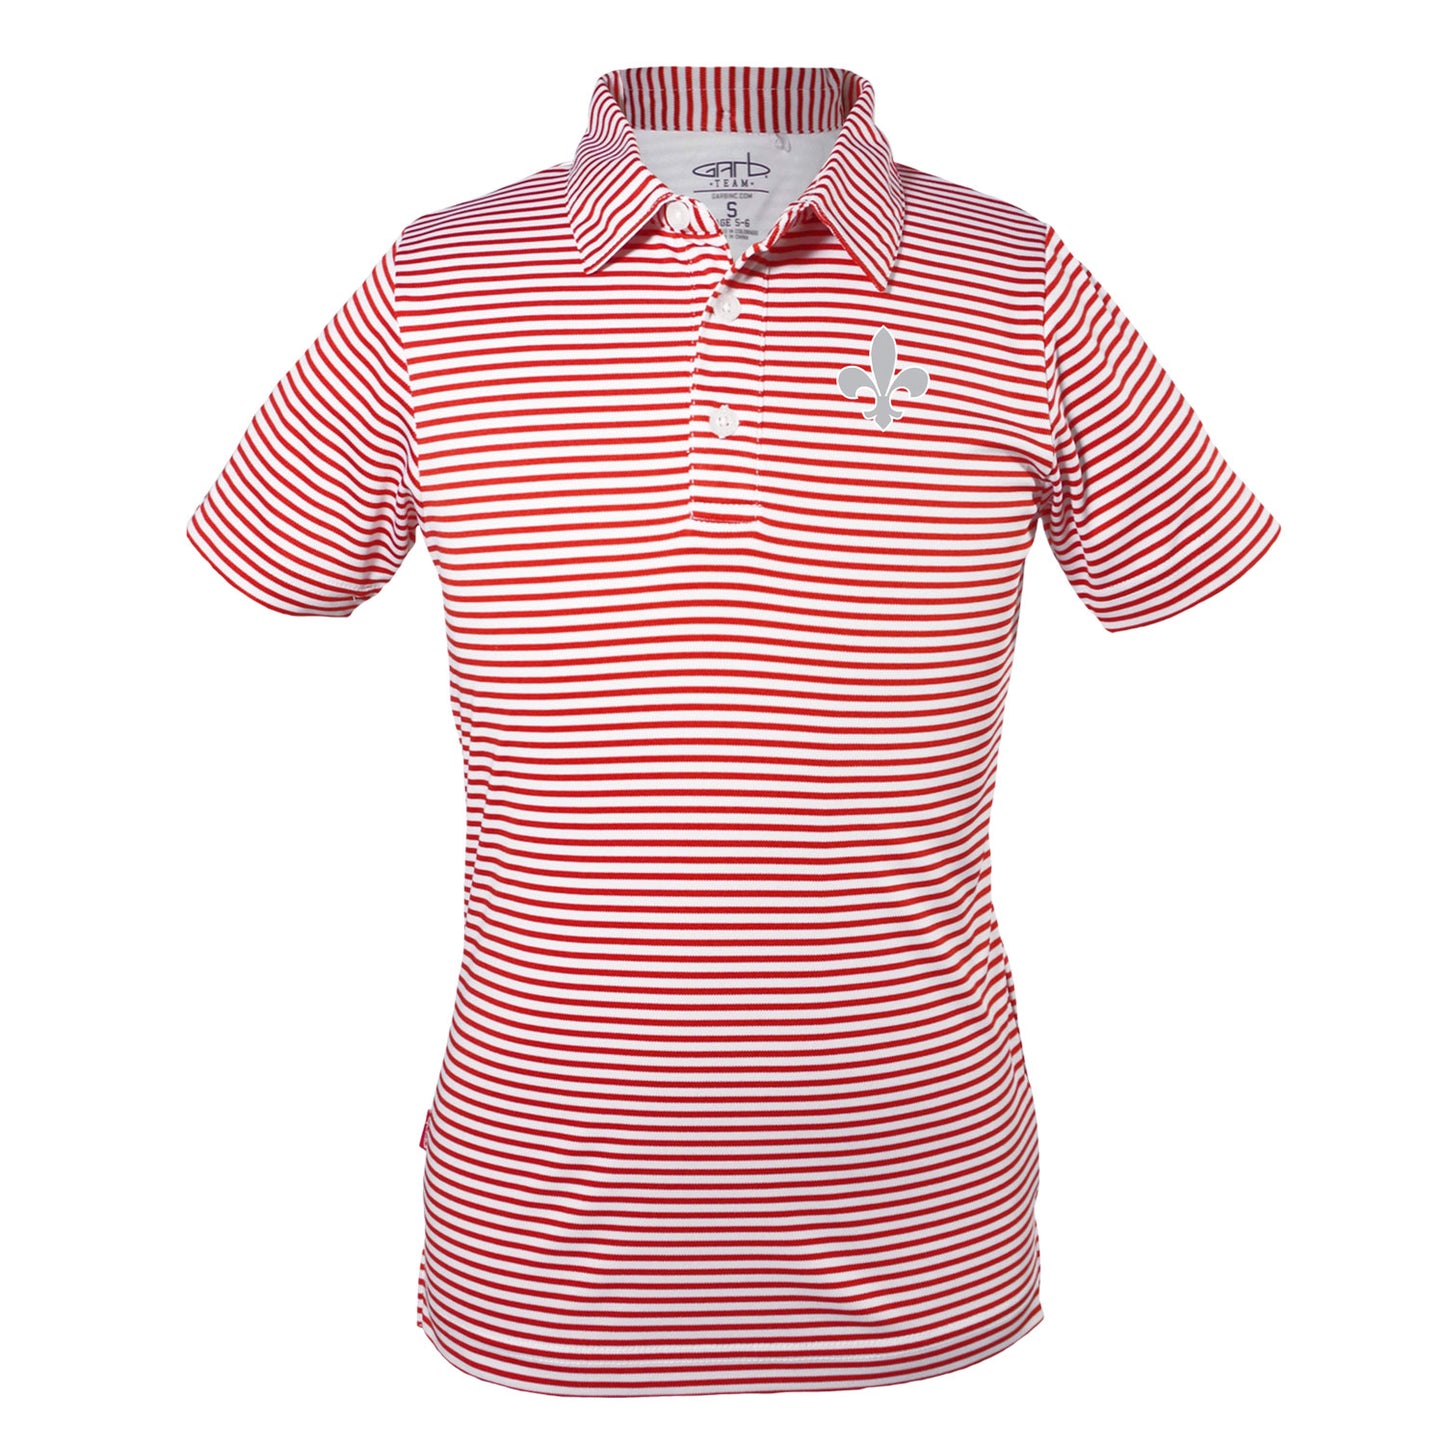 Garb Youth Short Sleeve Polo